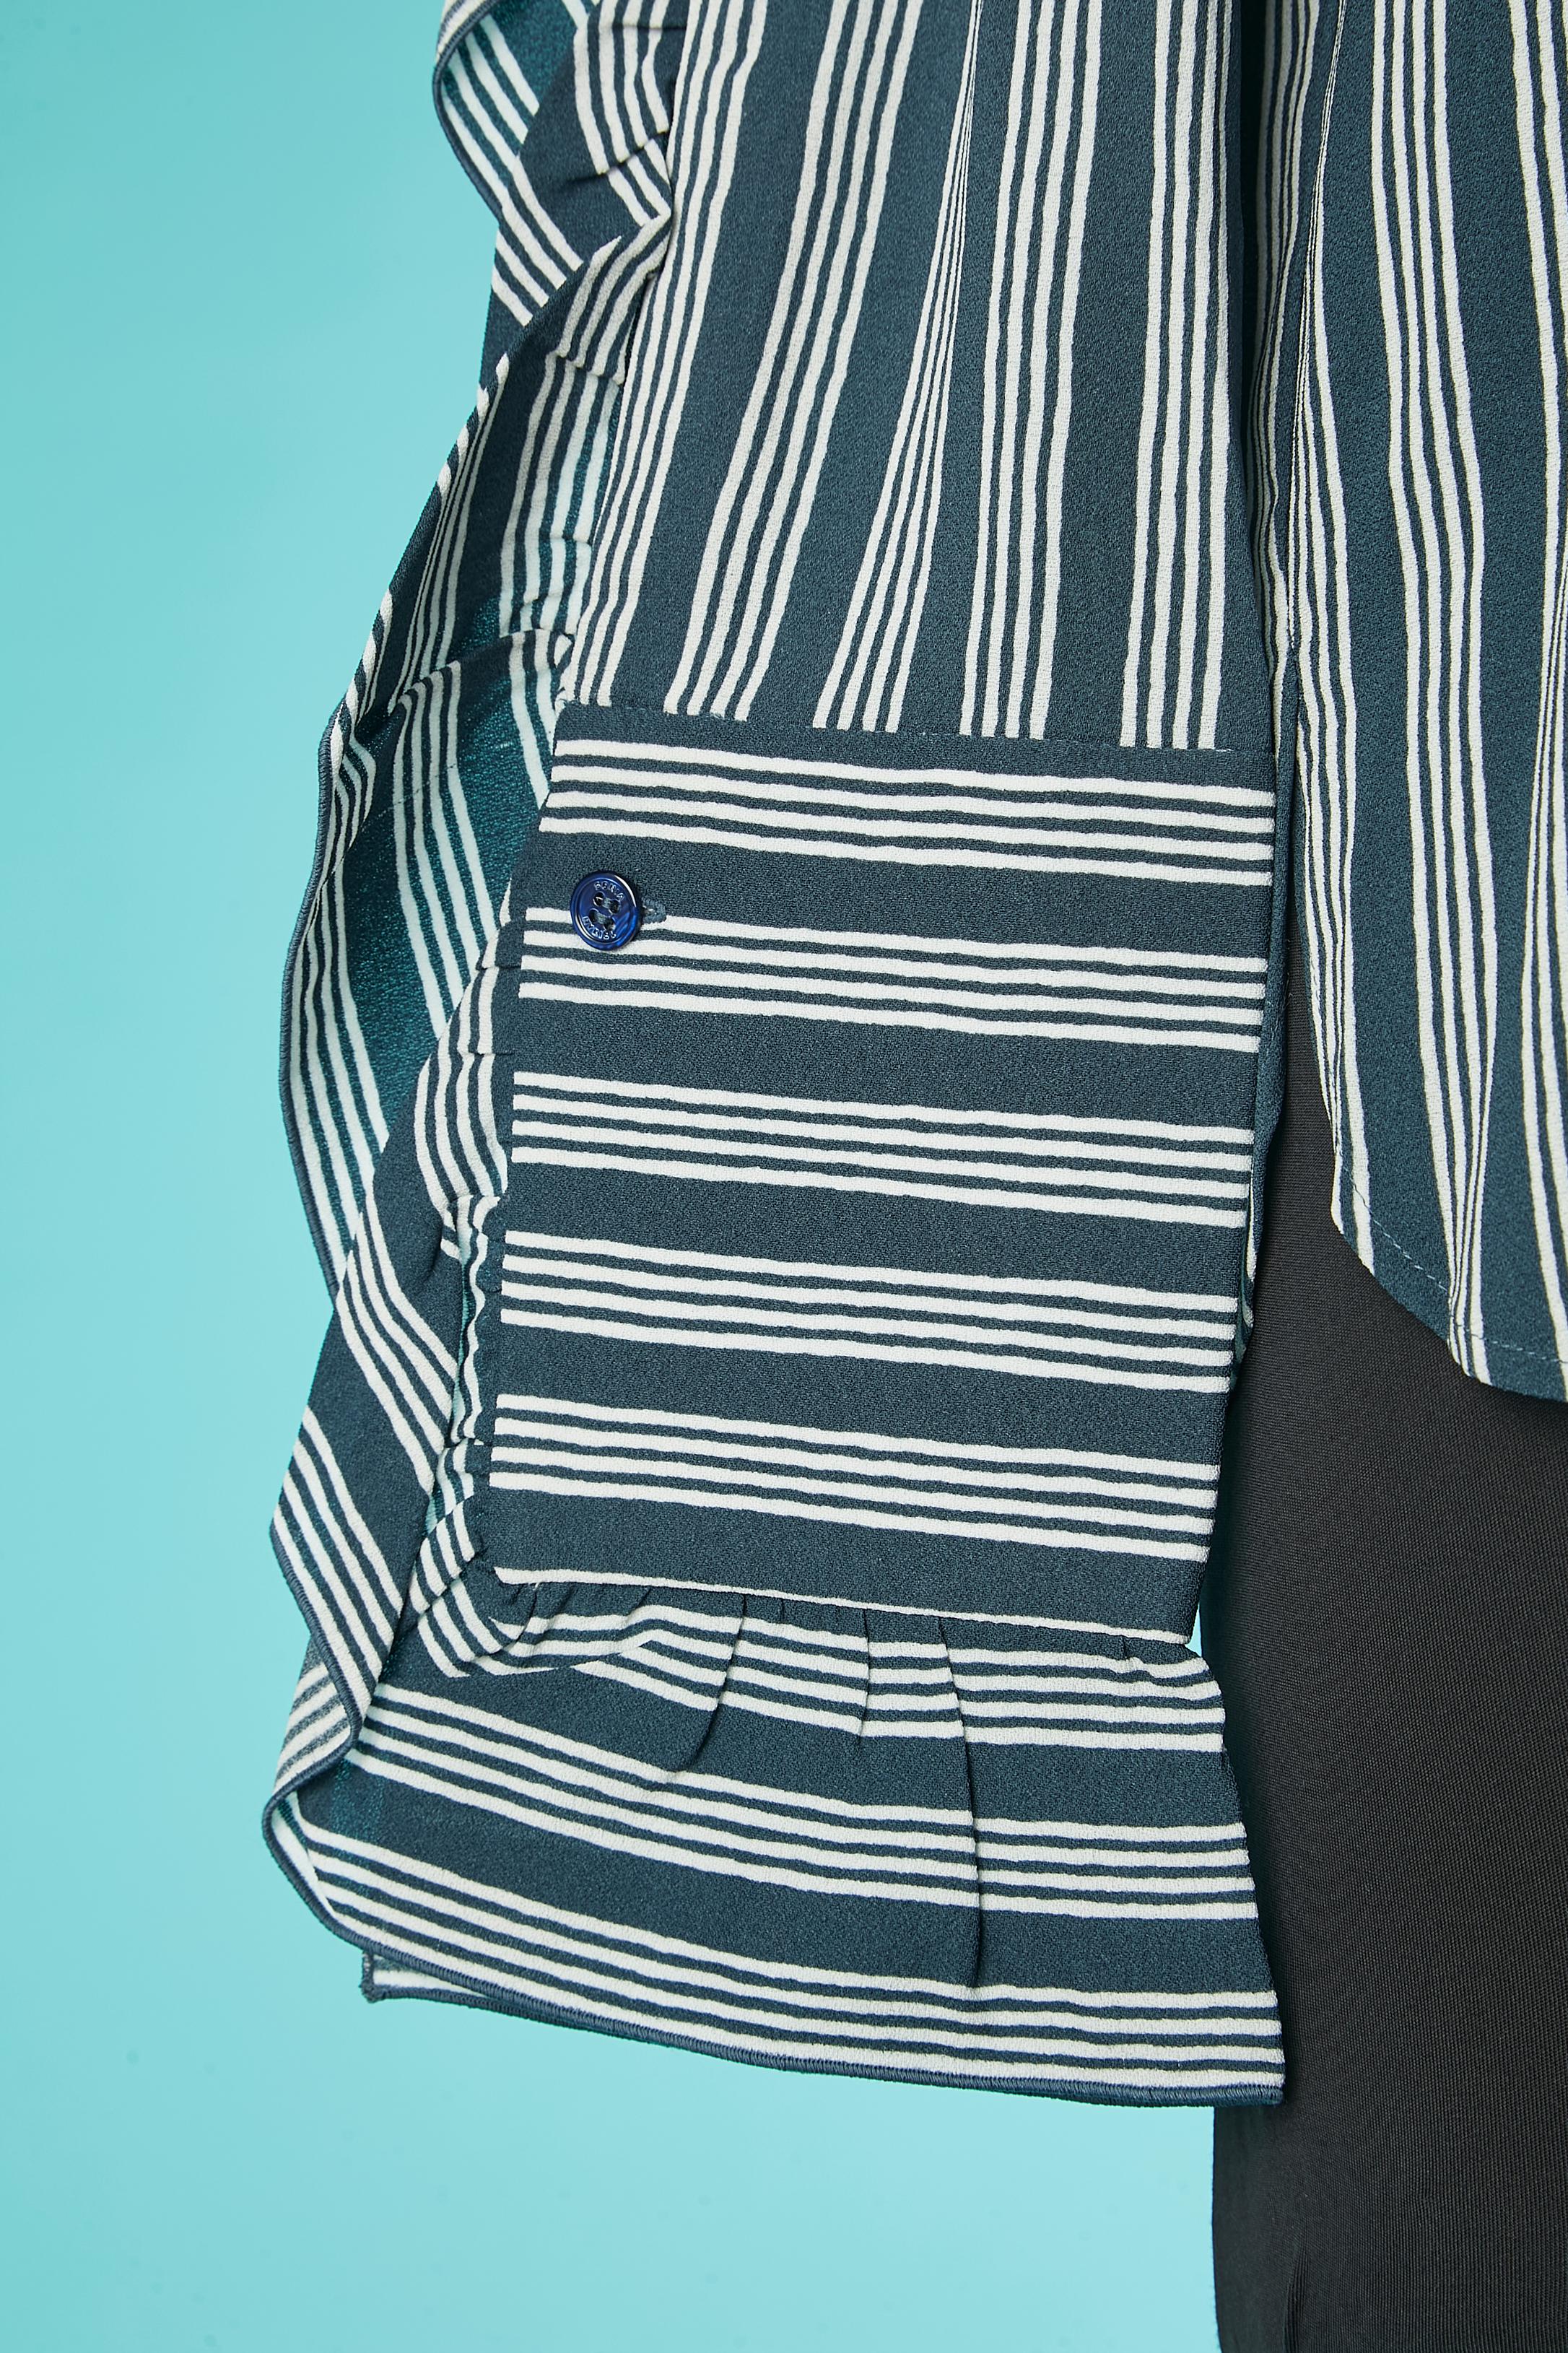 Women's Striped shirt with ruffles on the collar and on the sleeves Sonia Rykiel 